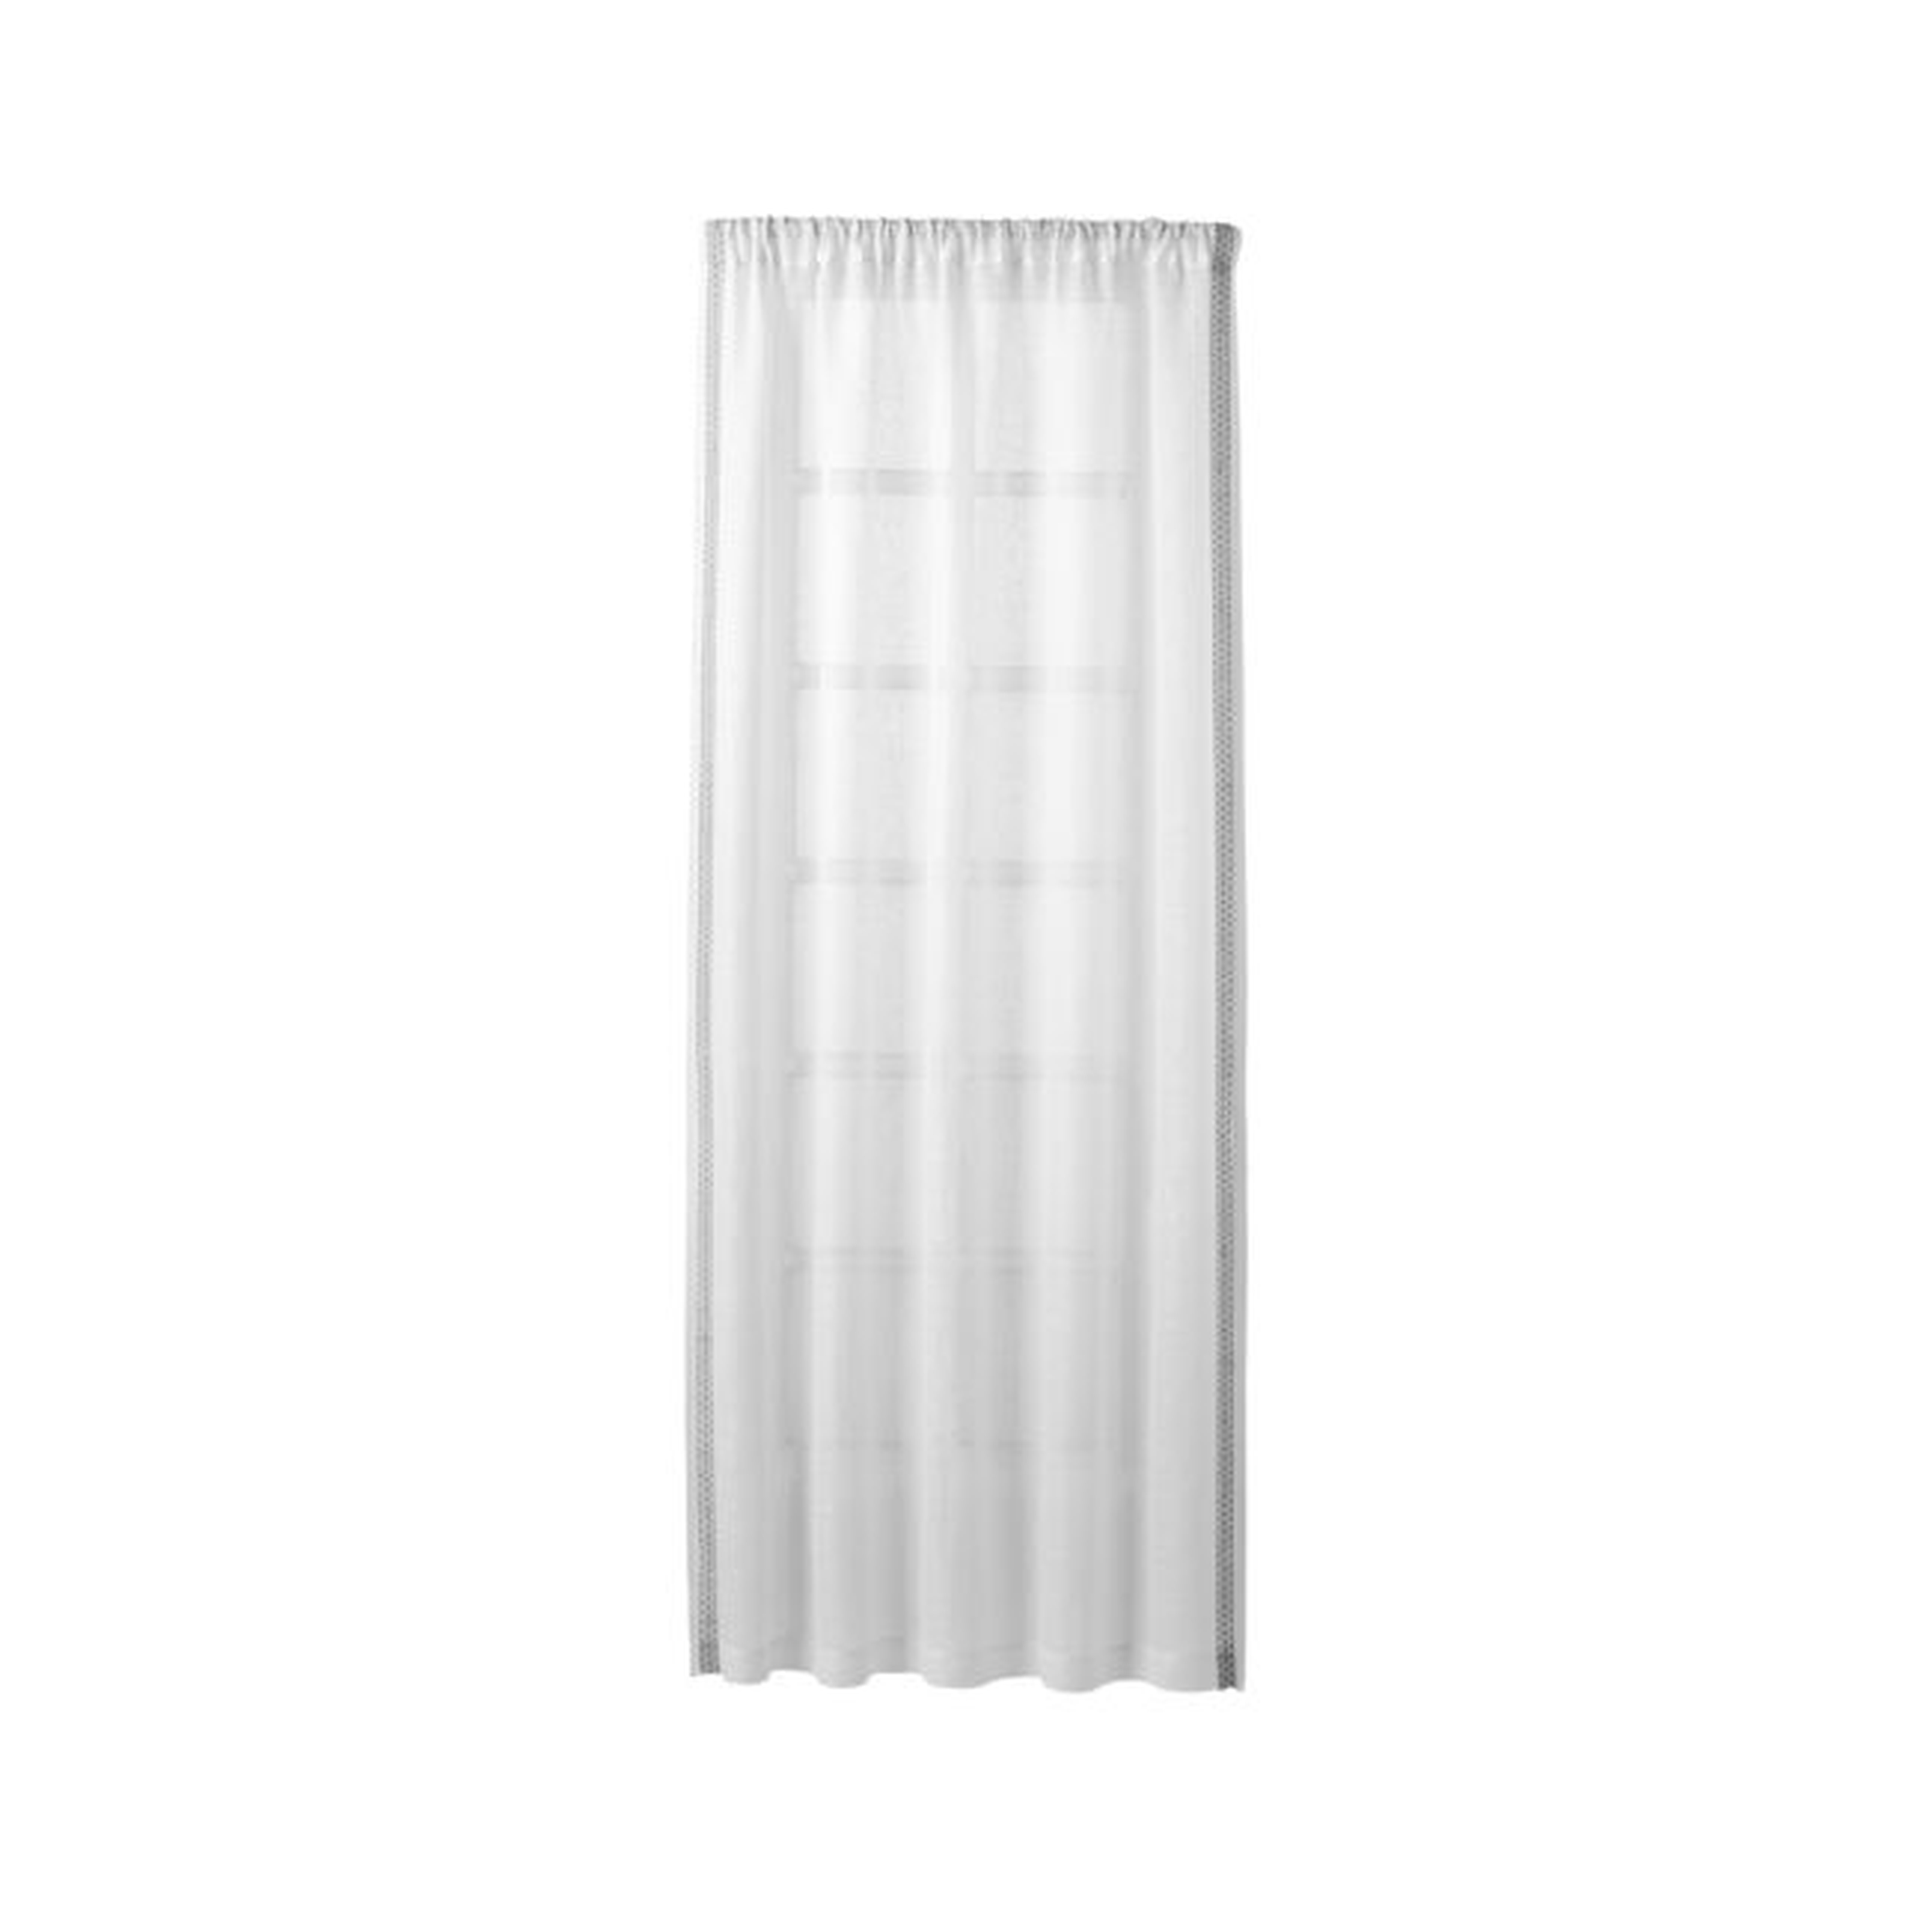 Bordered White Sheer Linen Curtain Panel 52"x84" - Crate and Barrel